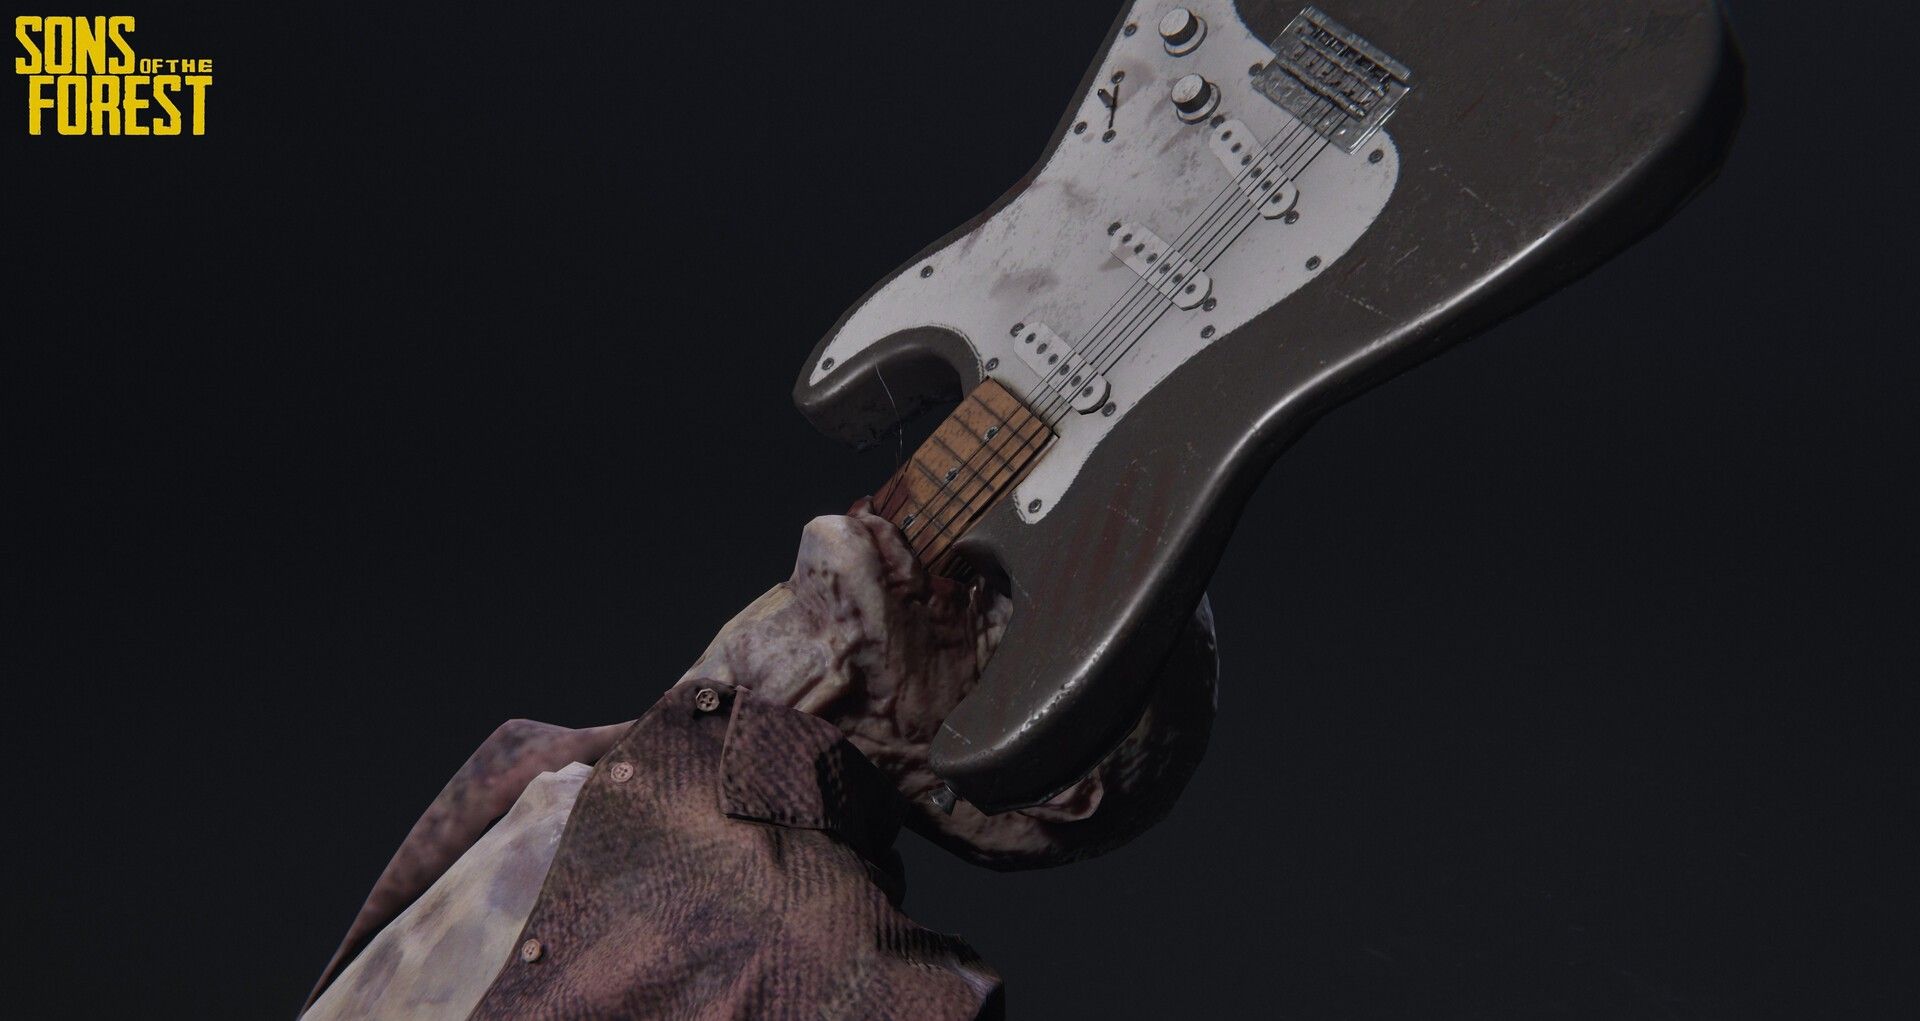 An electric guitar sticks out of the throat of a dead man in Sons of the Forest